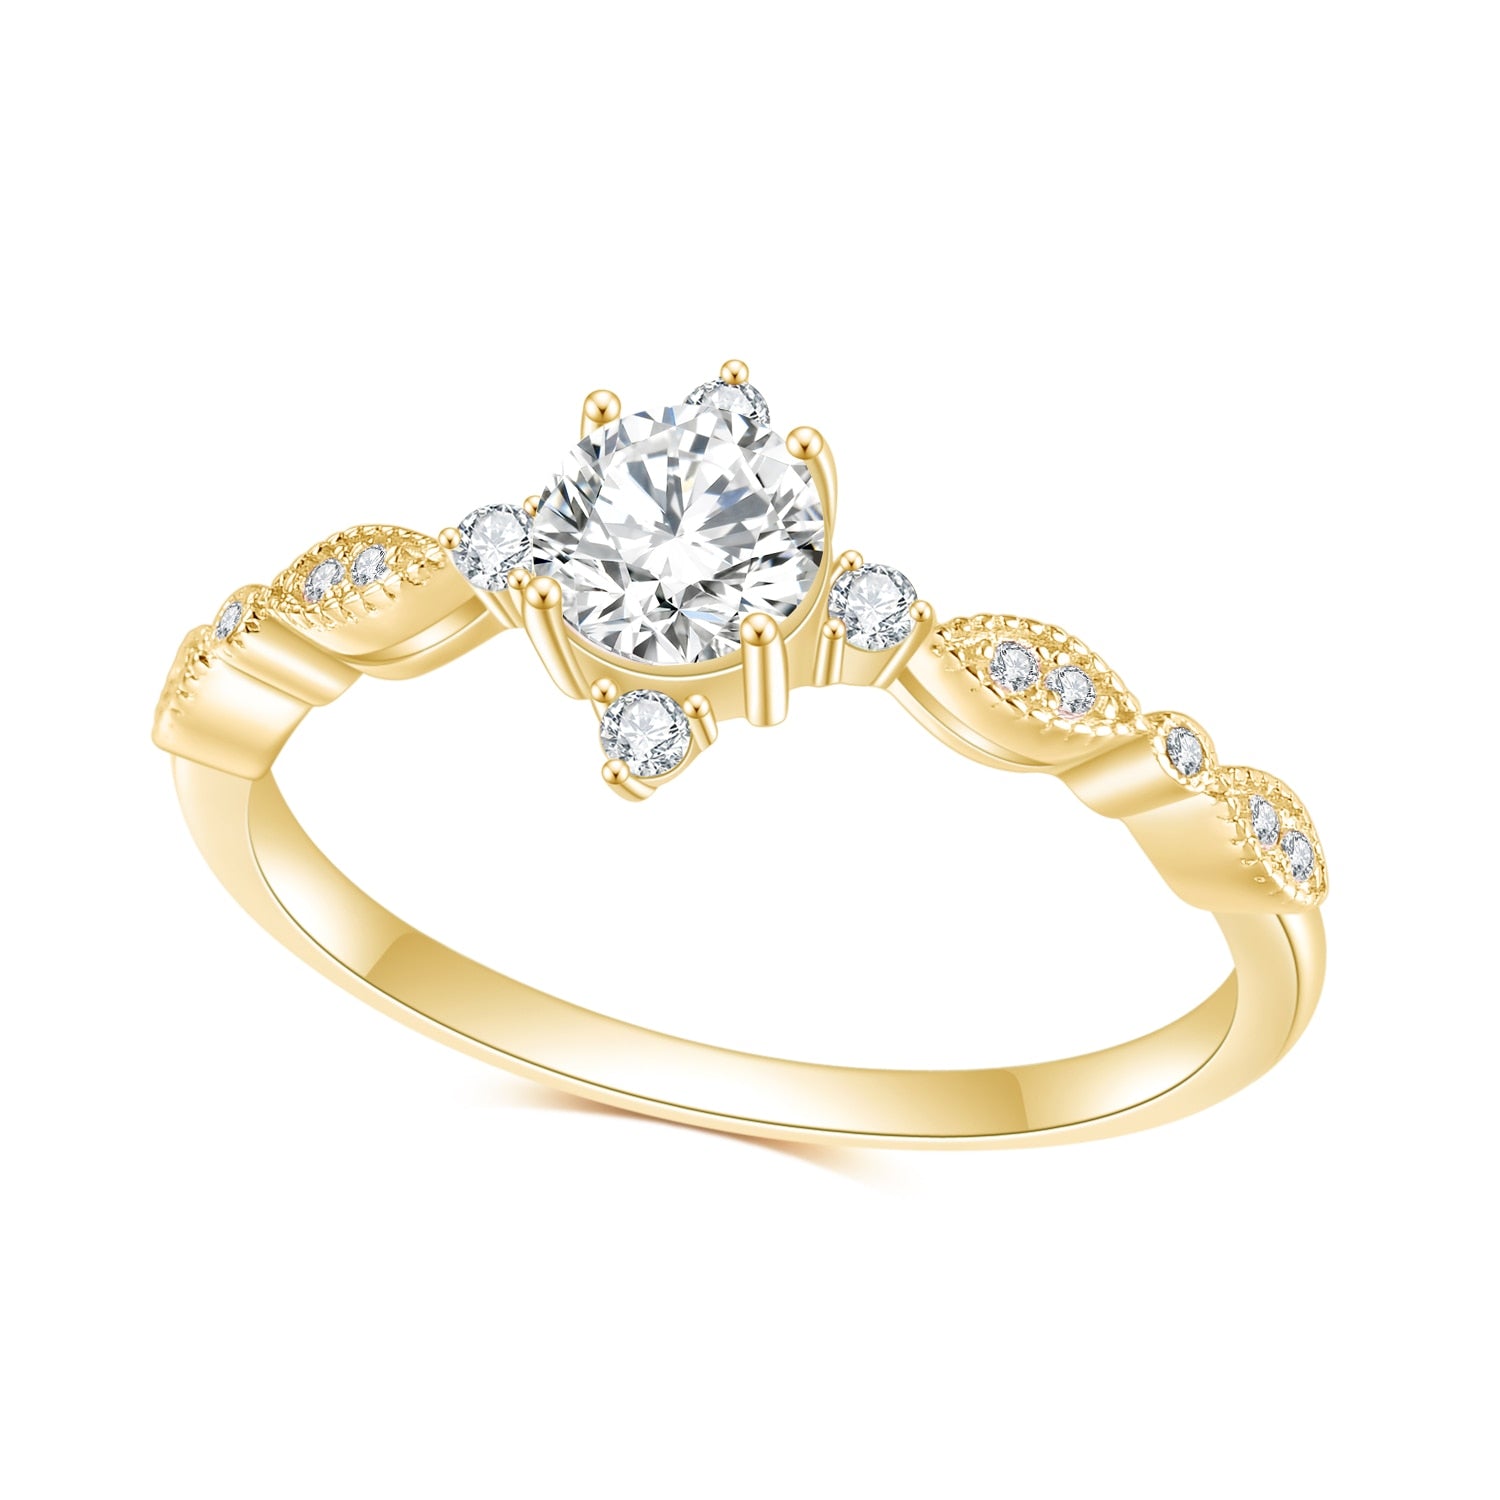 A gold vintage inspired engagement ring set with a round moissanite and 4 small zircons on all four sides.